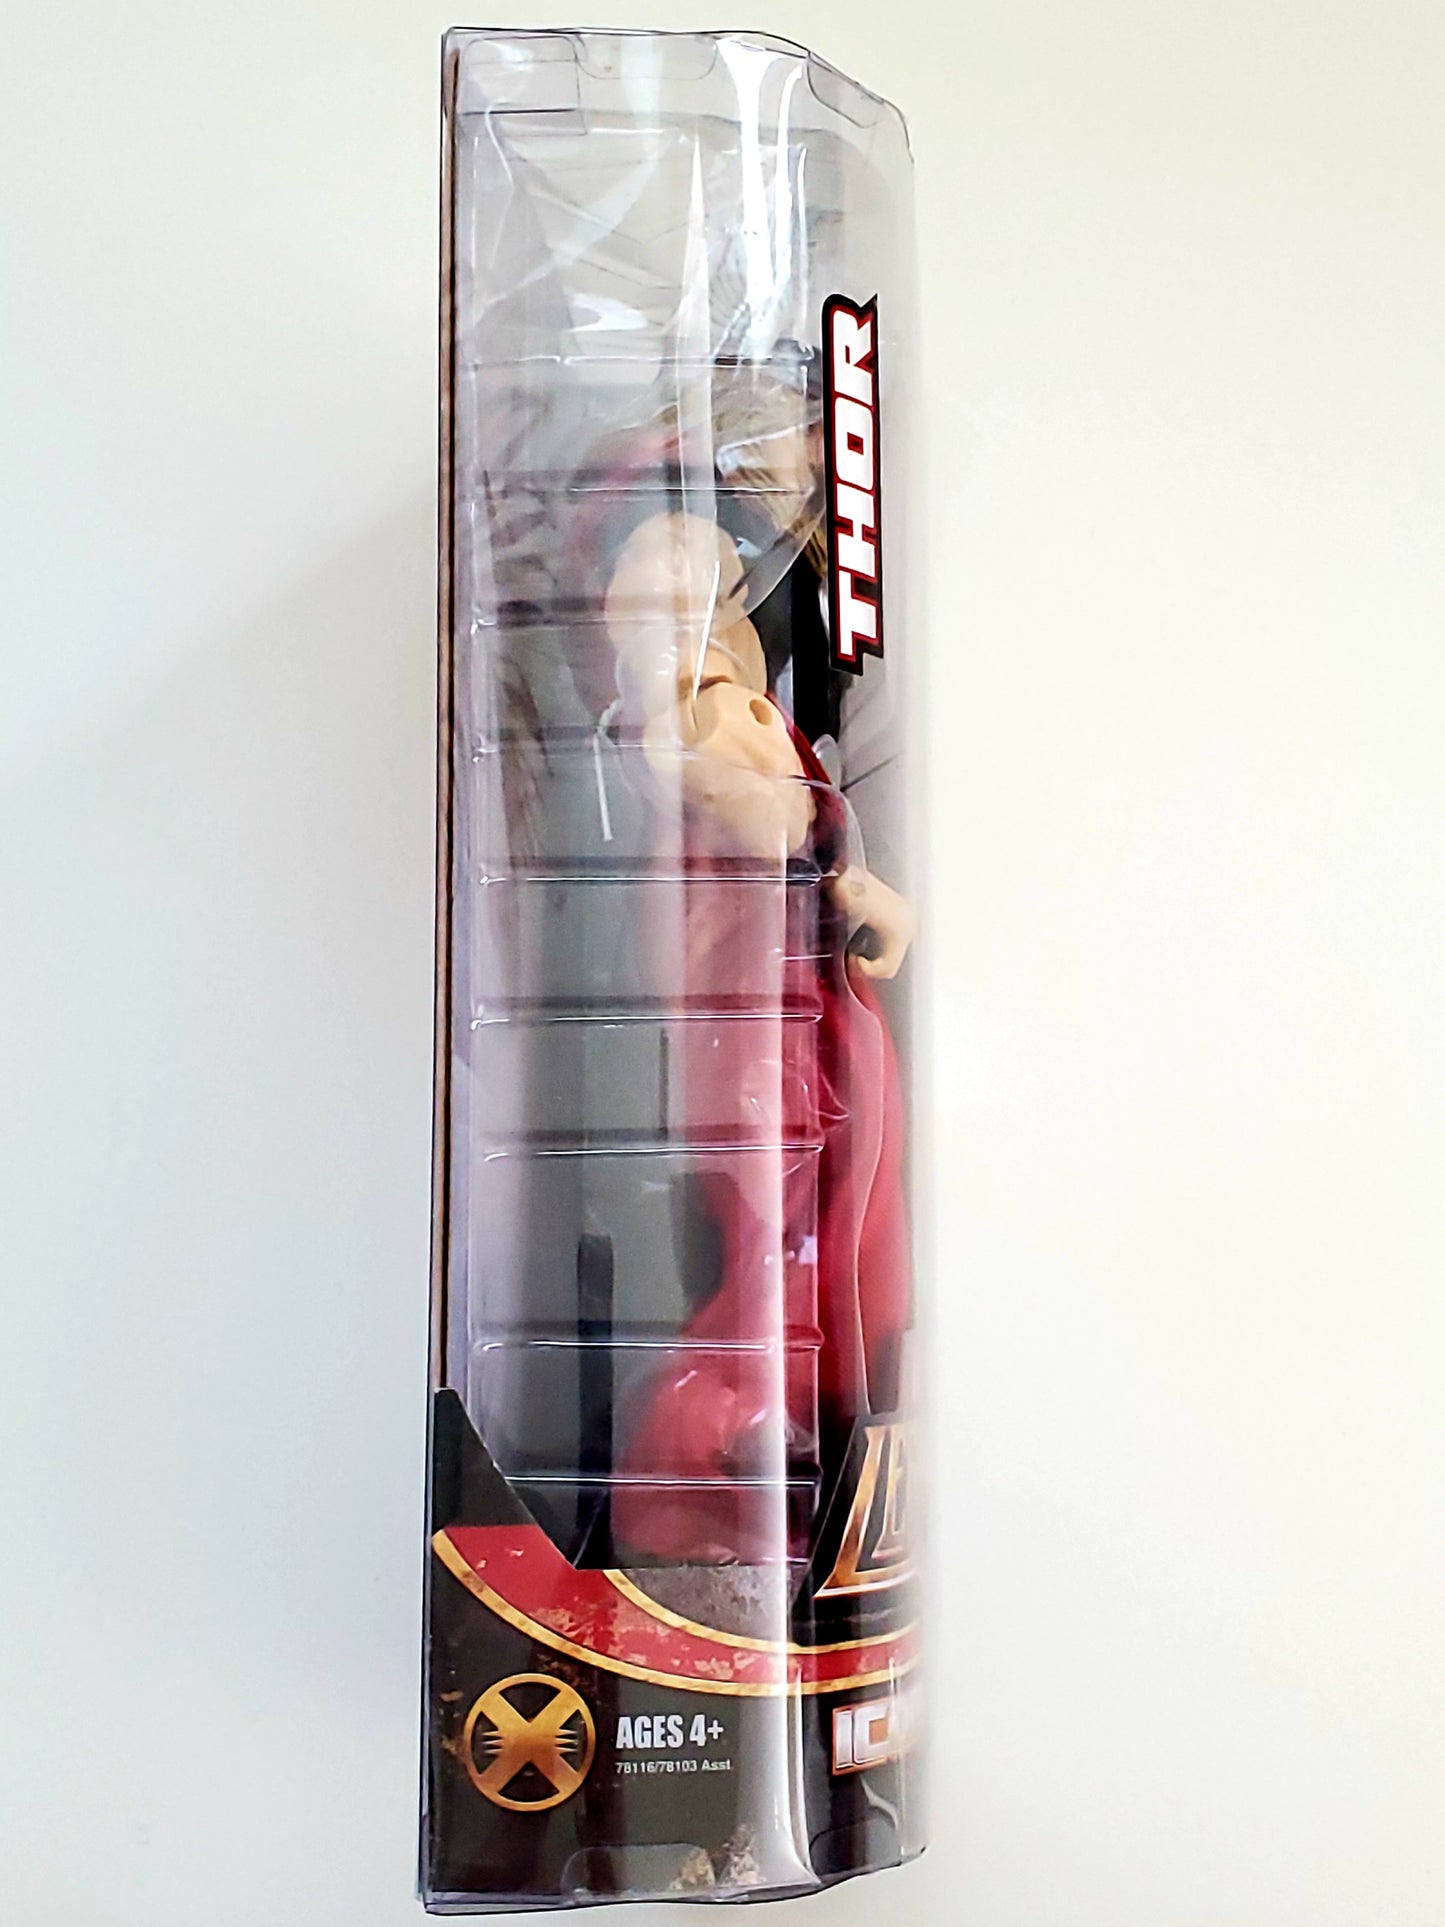 Marvel Legends Icons Series Thor 12-Inch Action Figure